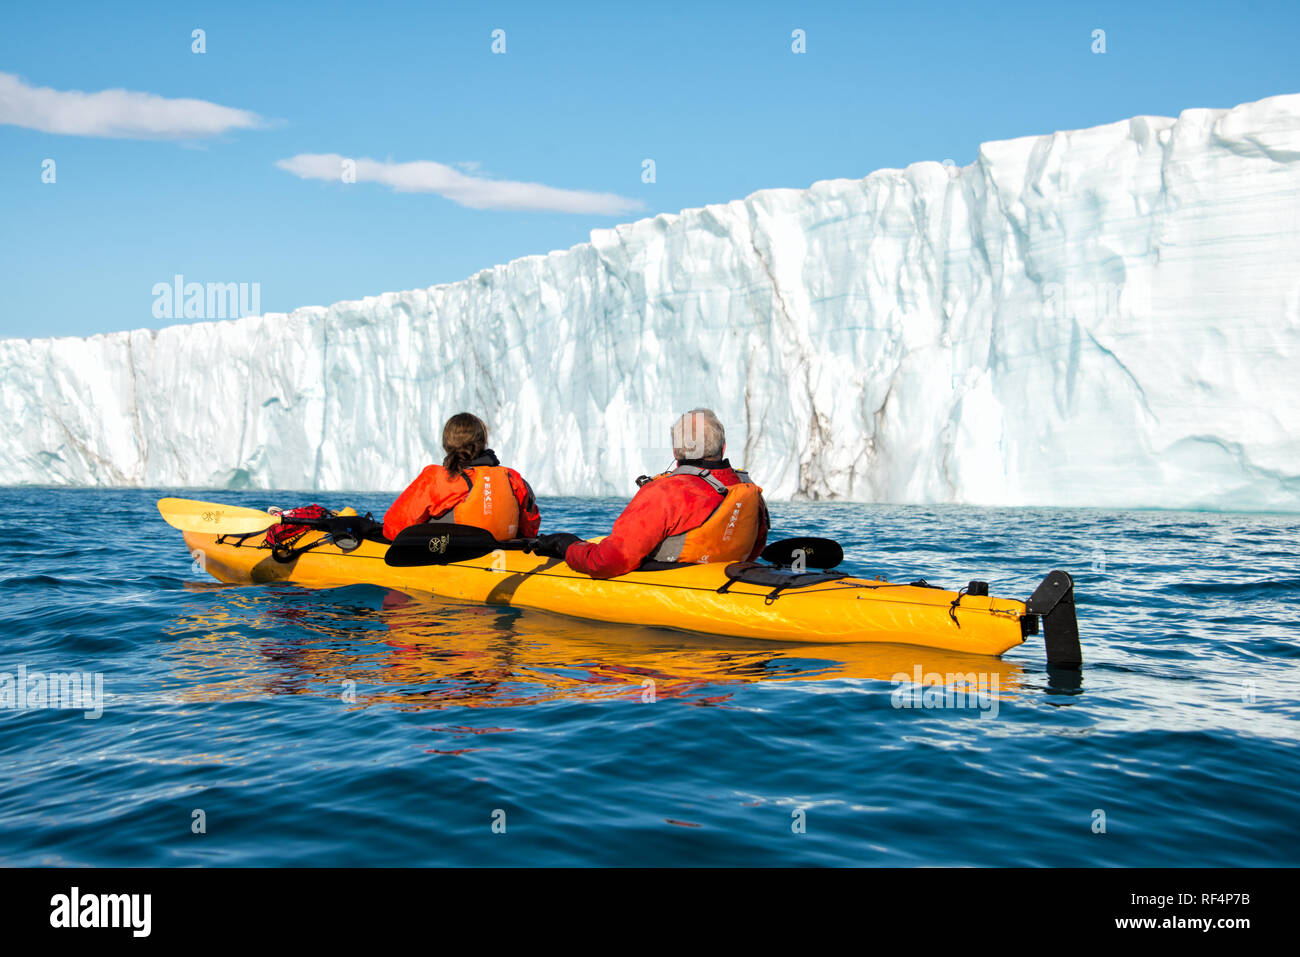 BRASVELLBREEN GLACIER, Svalbard — Kayakers navigate the icy waters near the Brasvellbreen glacier, one of the most impressive glaciers in the Svalbard archipelago. This unique kayaking experience offers visitors a close encounter with the Arctic landscape, highlighting the vast and awe-inspiring natural beauty of the region. Stock Photo